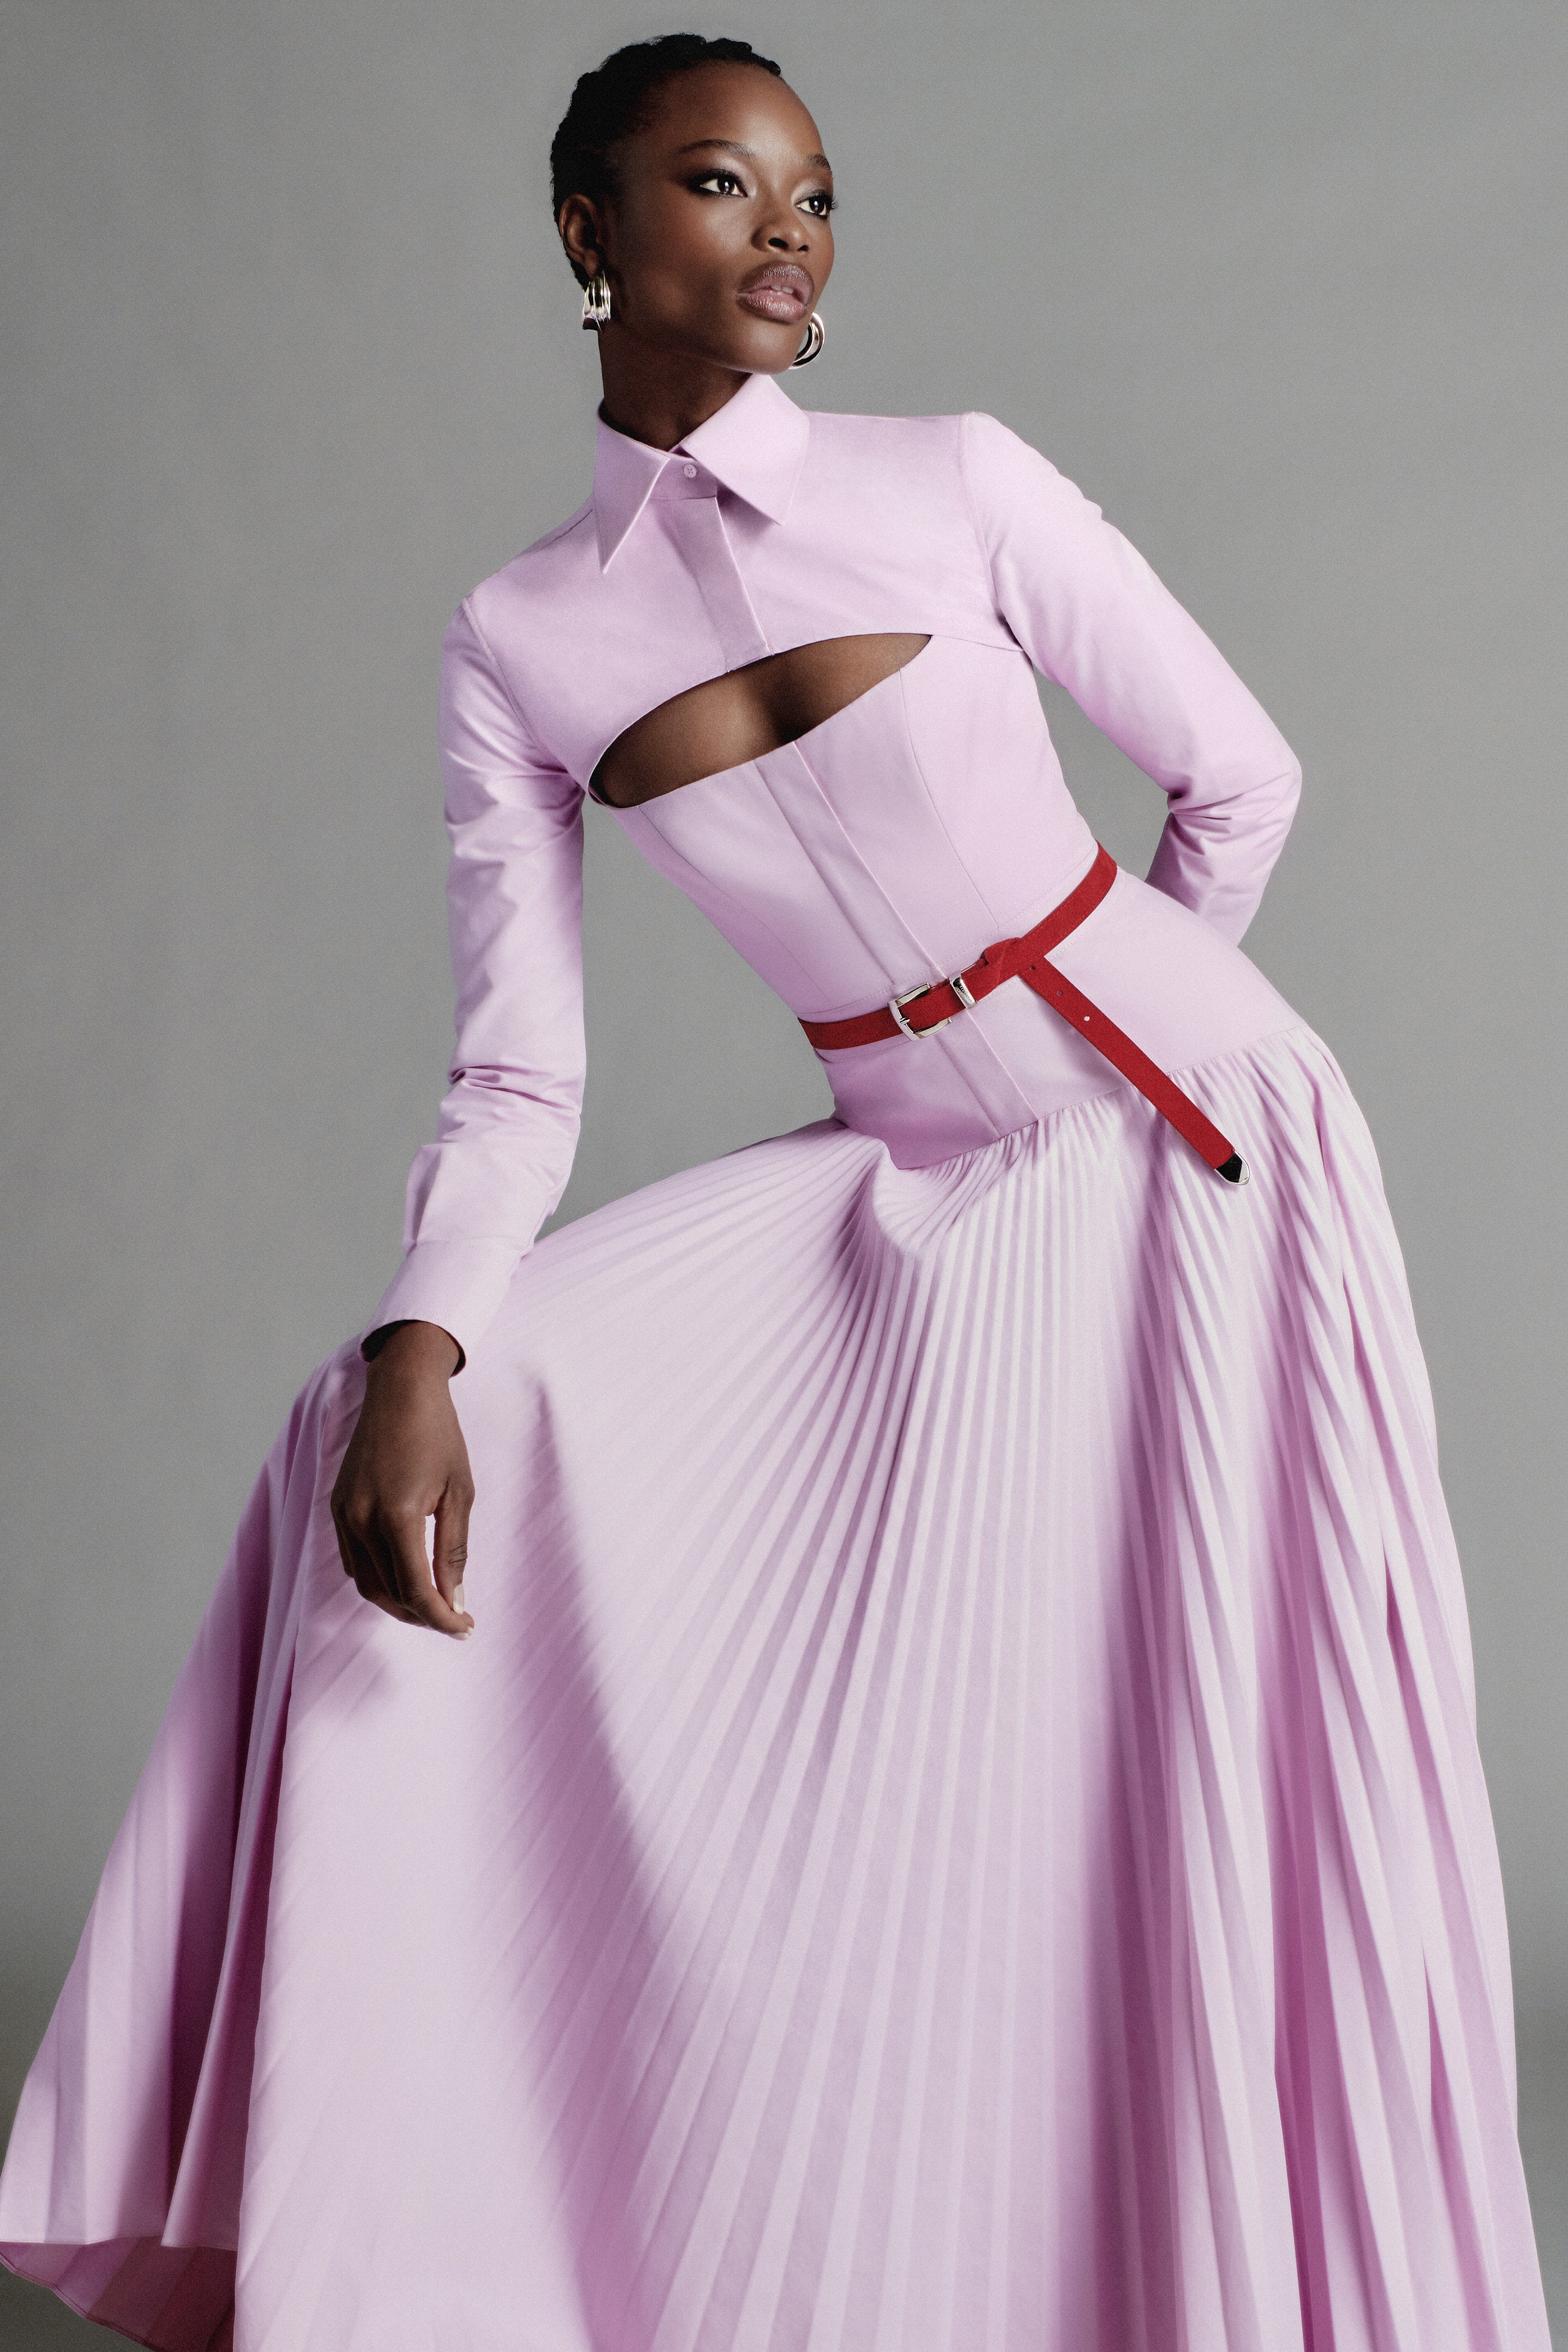 https://theimpression.com/wp-content/uploads/2020/08/Brandon-Maxwell-Resort-2021-Mens-collection-The-Impression-003.jpg